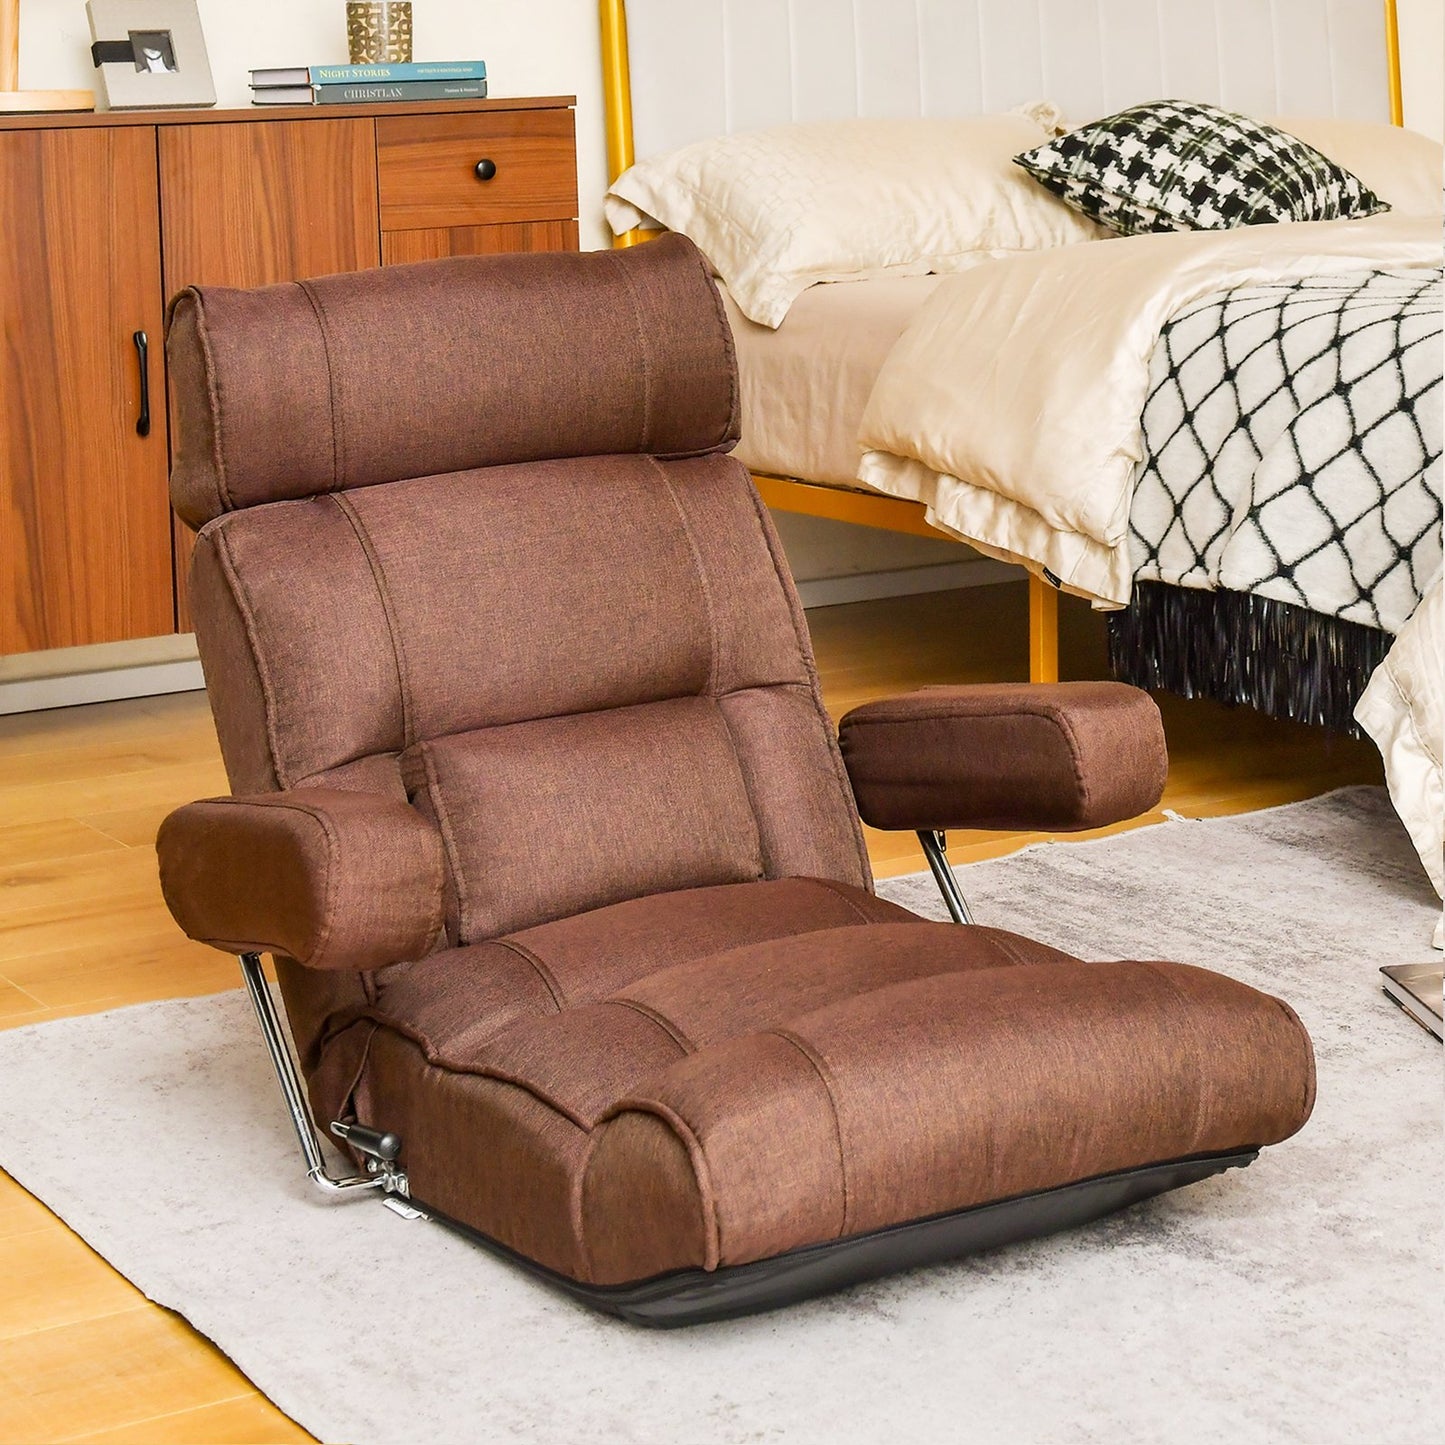 Adjustable Folding Sofa Chair with 6 Position Stepless Back, Brown